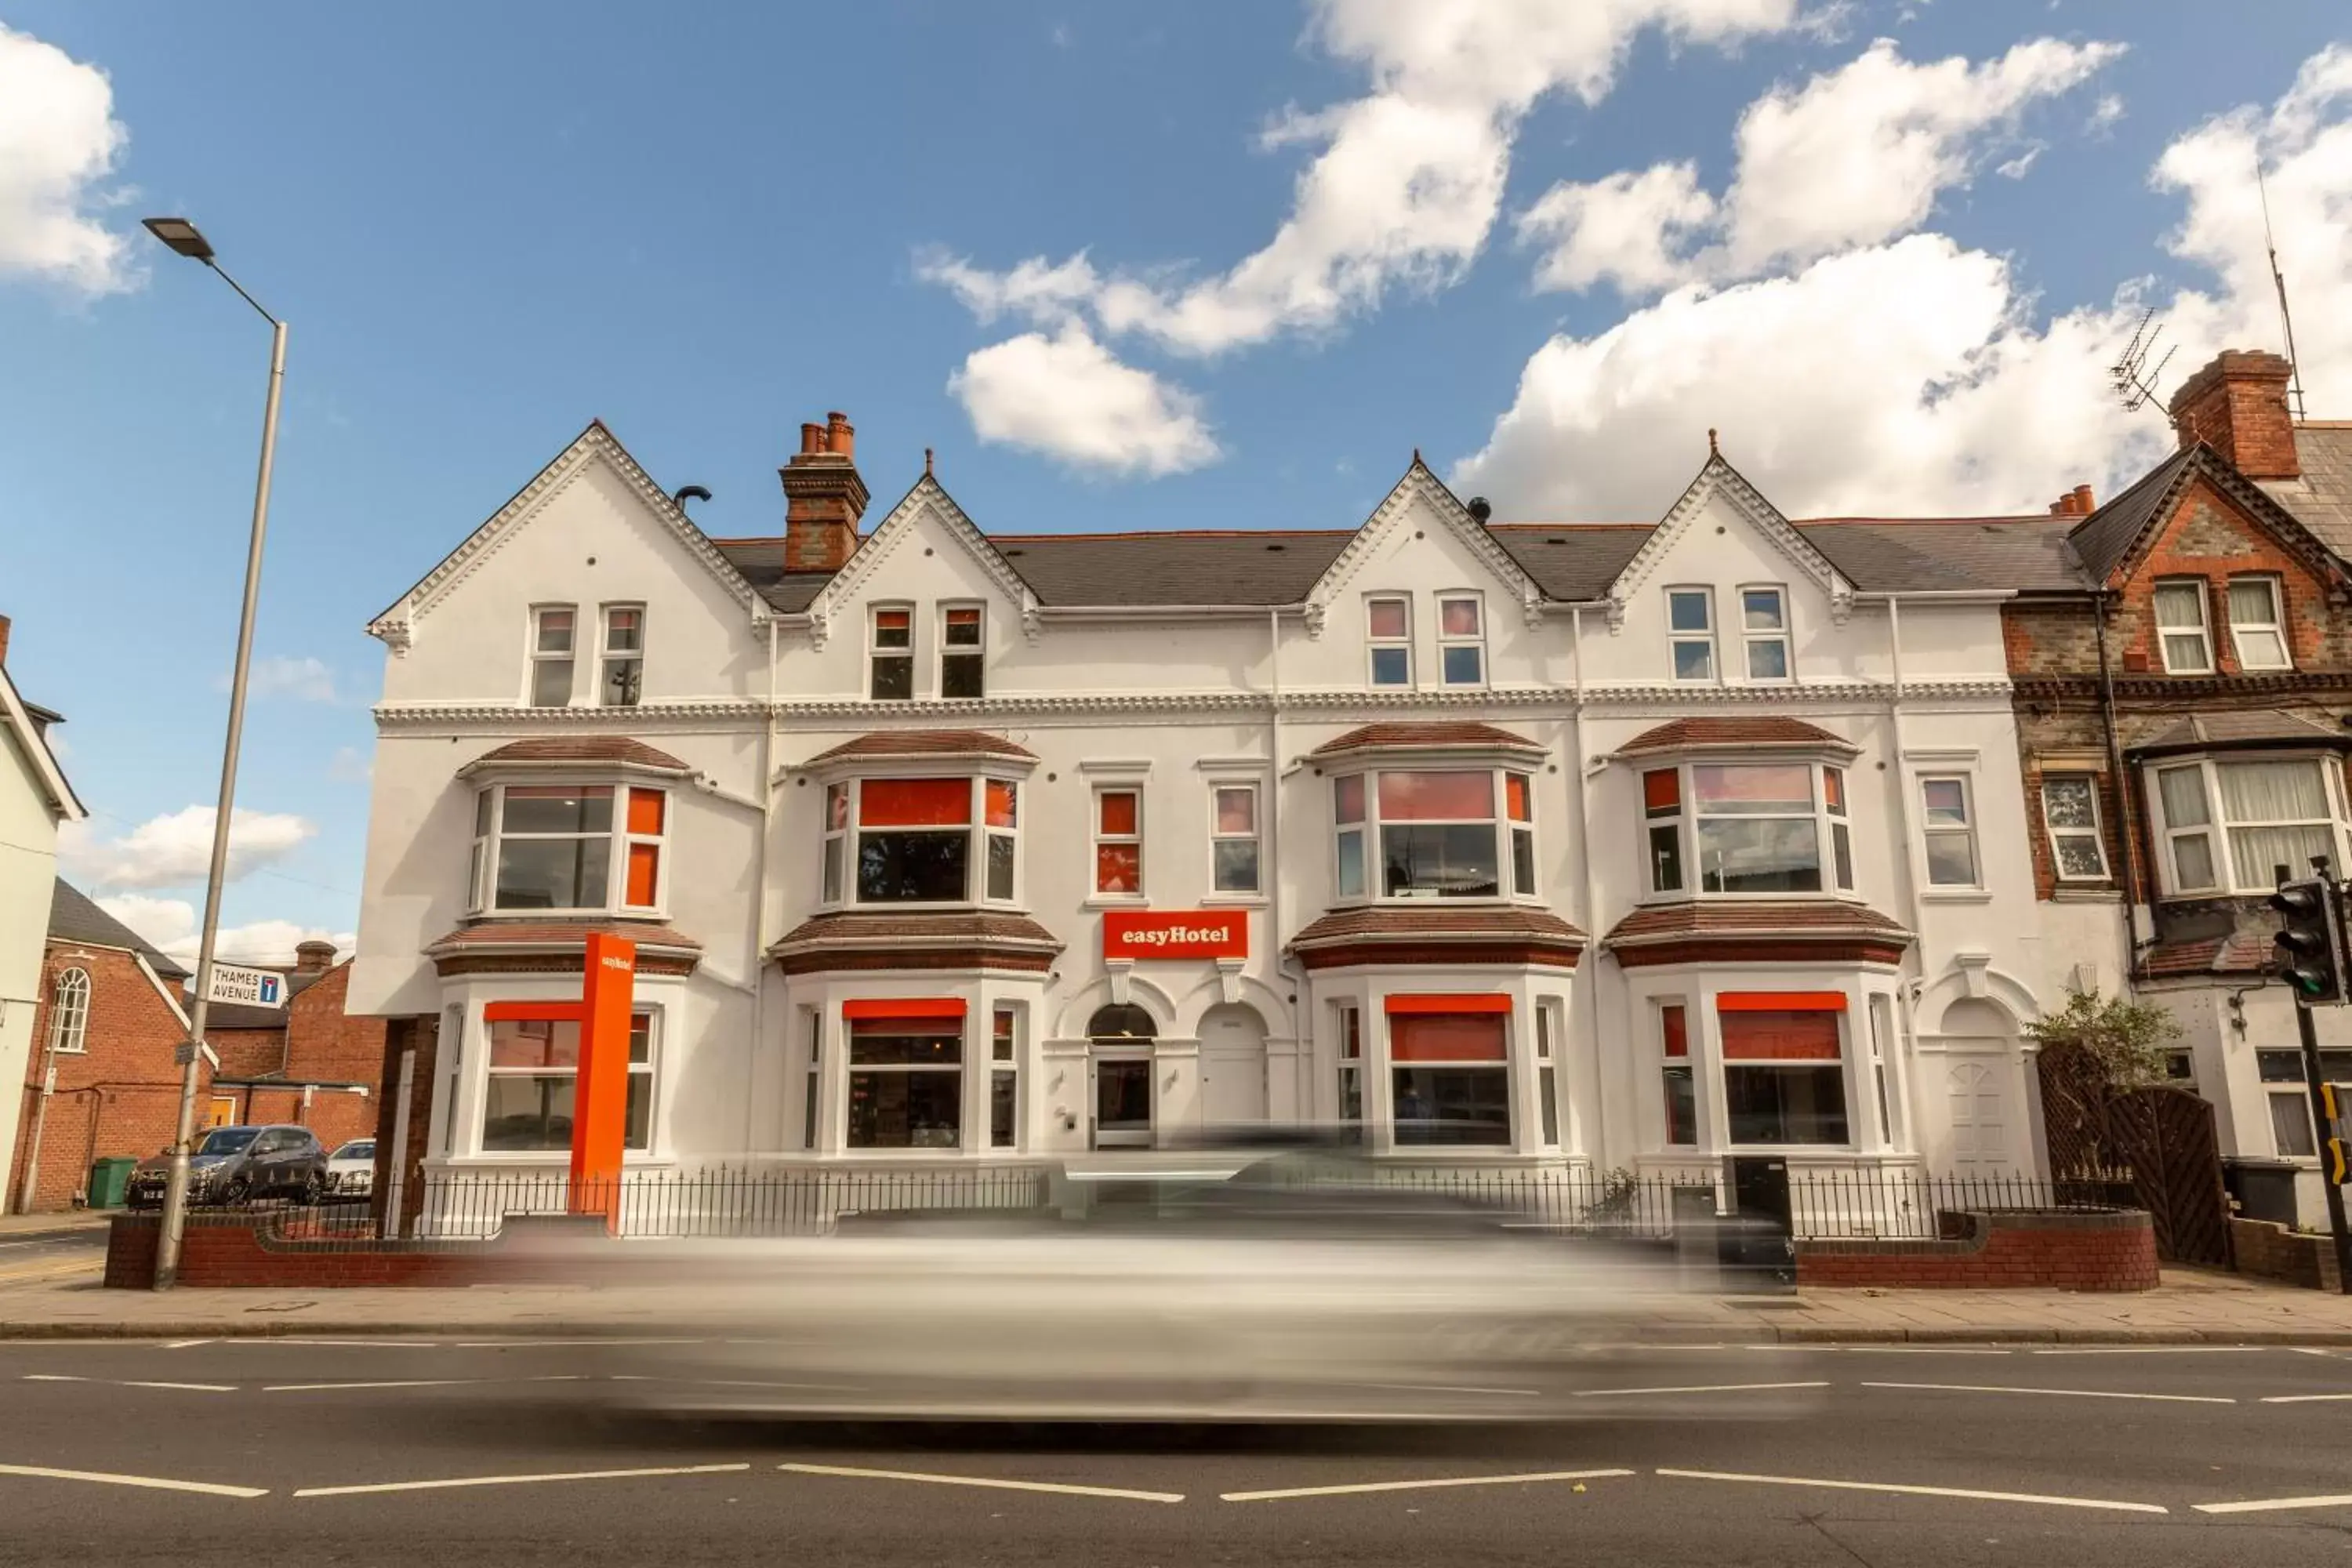 Property Building in Easyhotel Reading